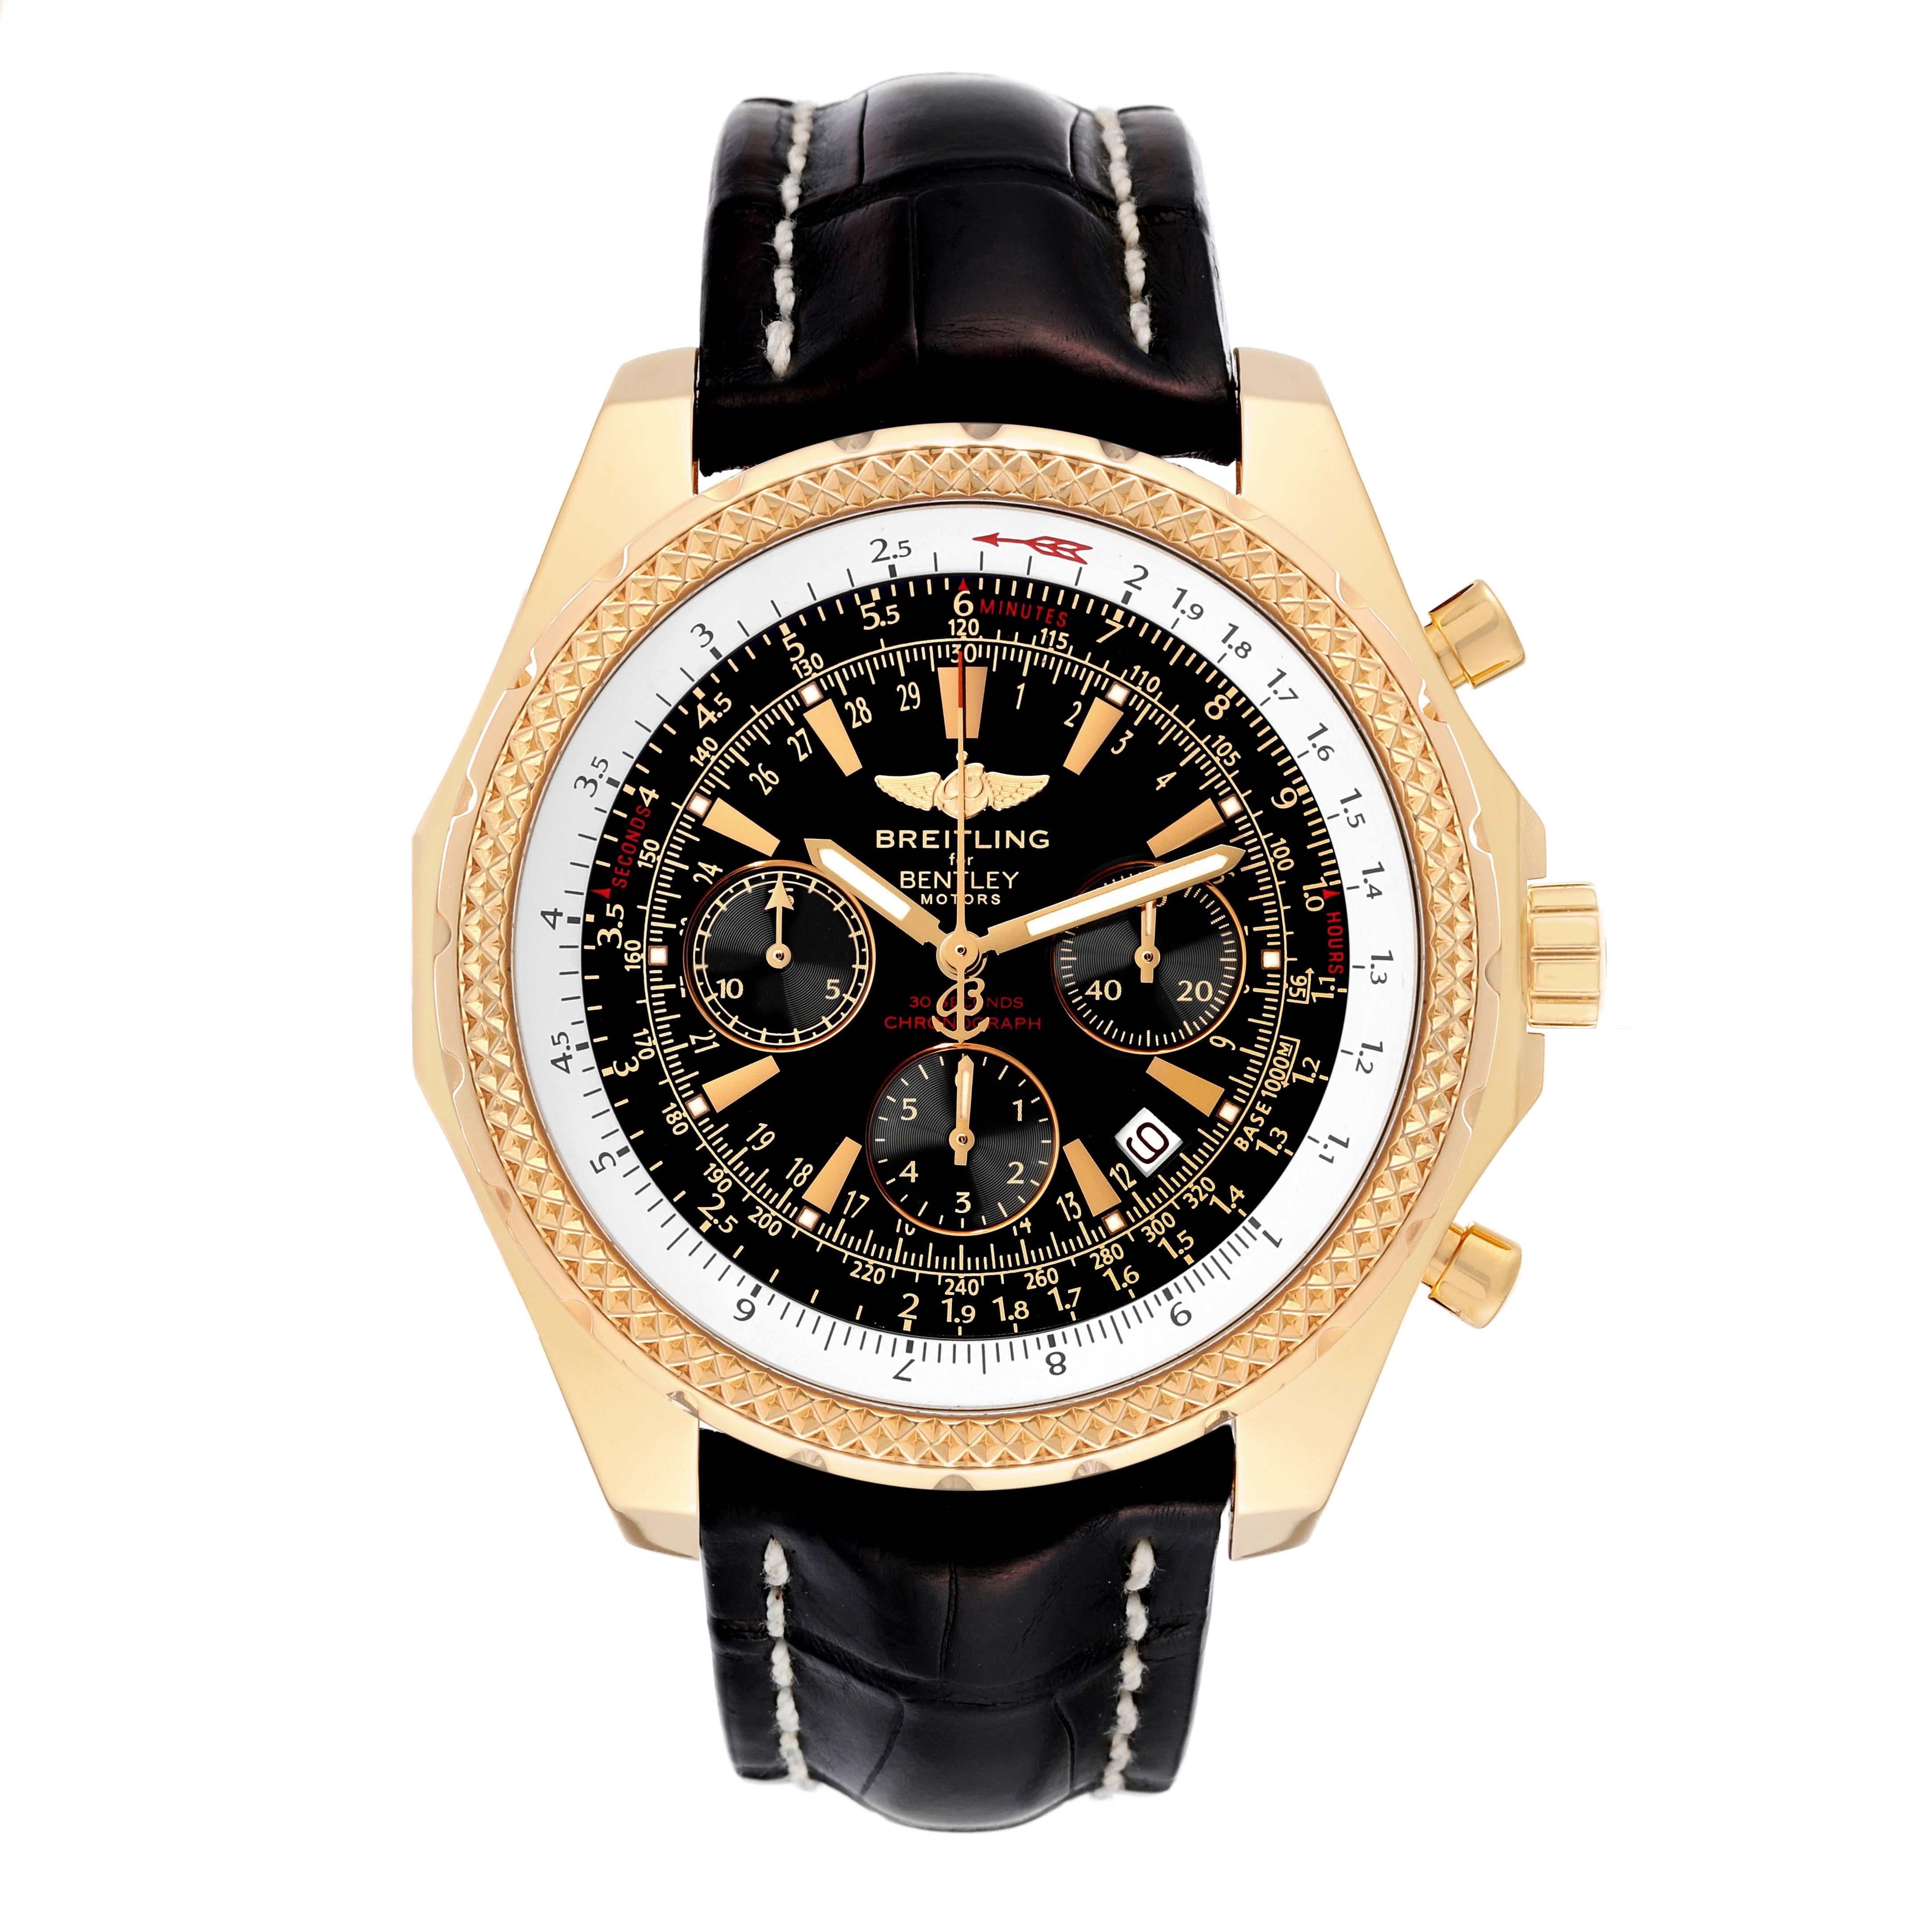 Breitling Bentley Yellow Gold Black Dial Chronograph Mens Watch K25362. Self-winding automatic officially certified chronometer movement. Chronograph function. 18K yellow gold case 49.0 mm in diameter. 18K yellow gold screwed-down crown and pushers.